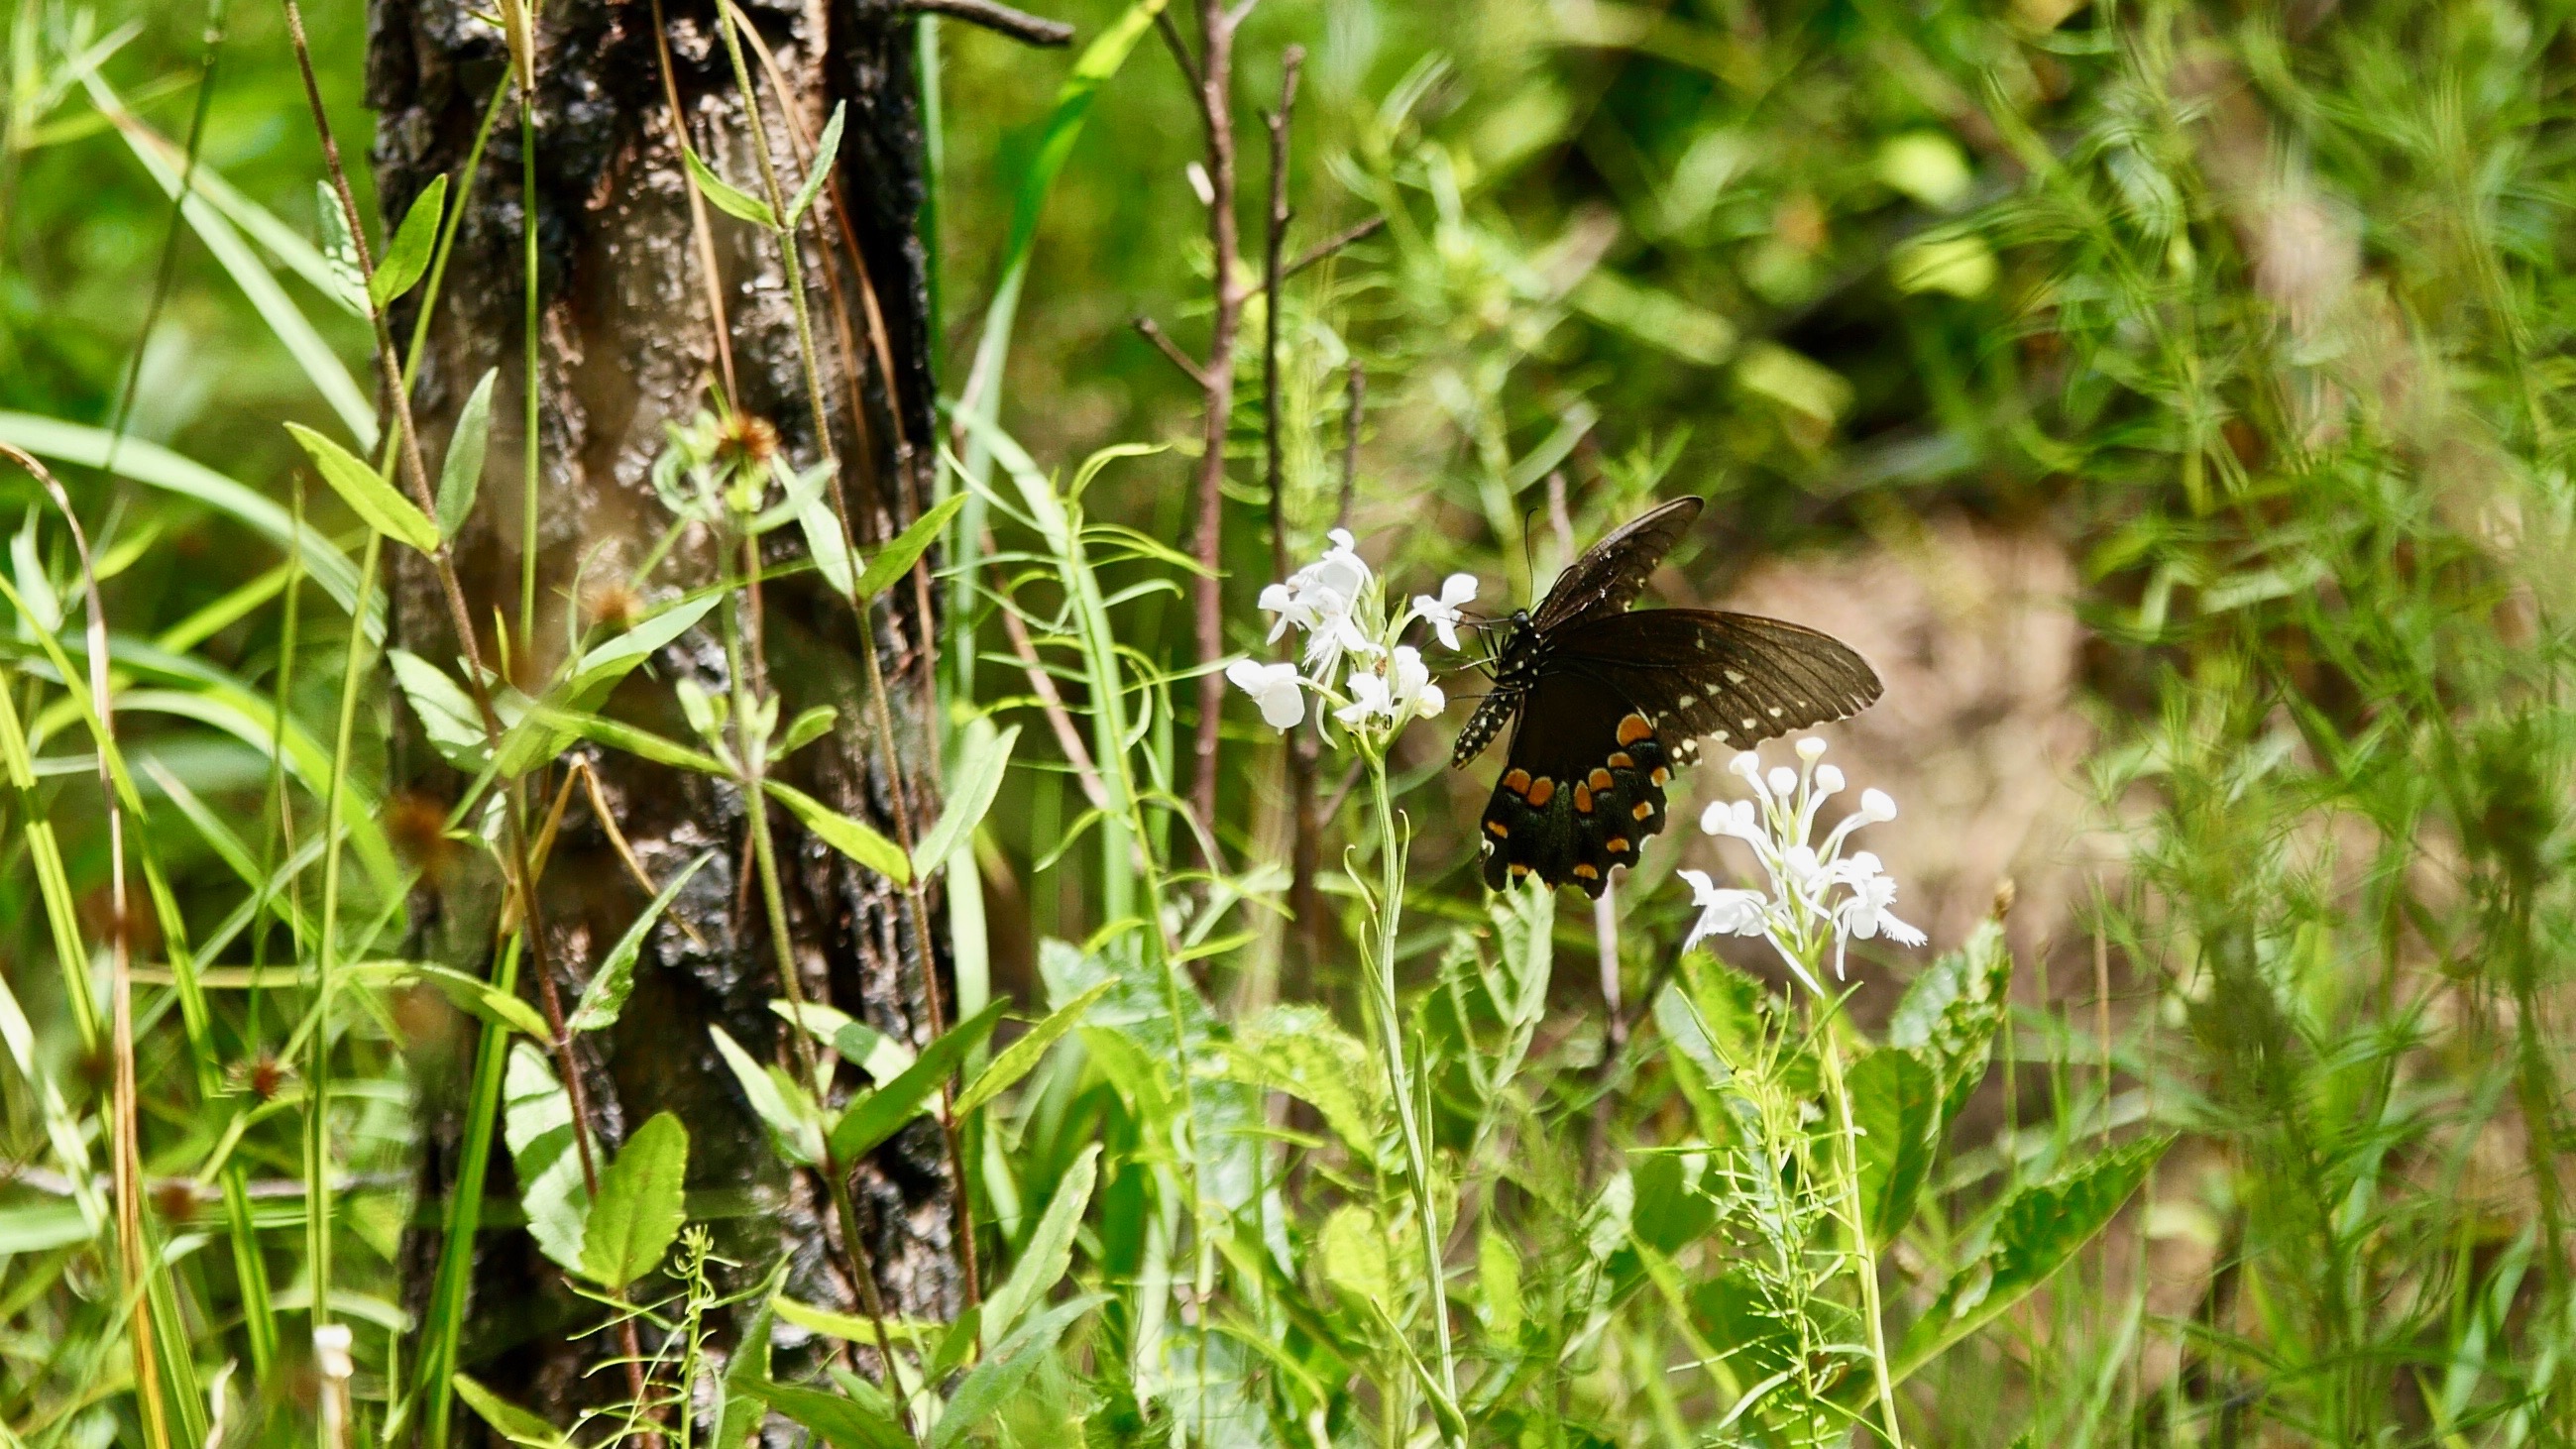 A black and orange butterfly sits on a small white orchid collecting nectar. Tall grasses and vegetation surround the plant.